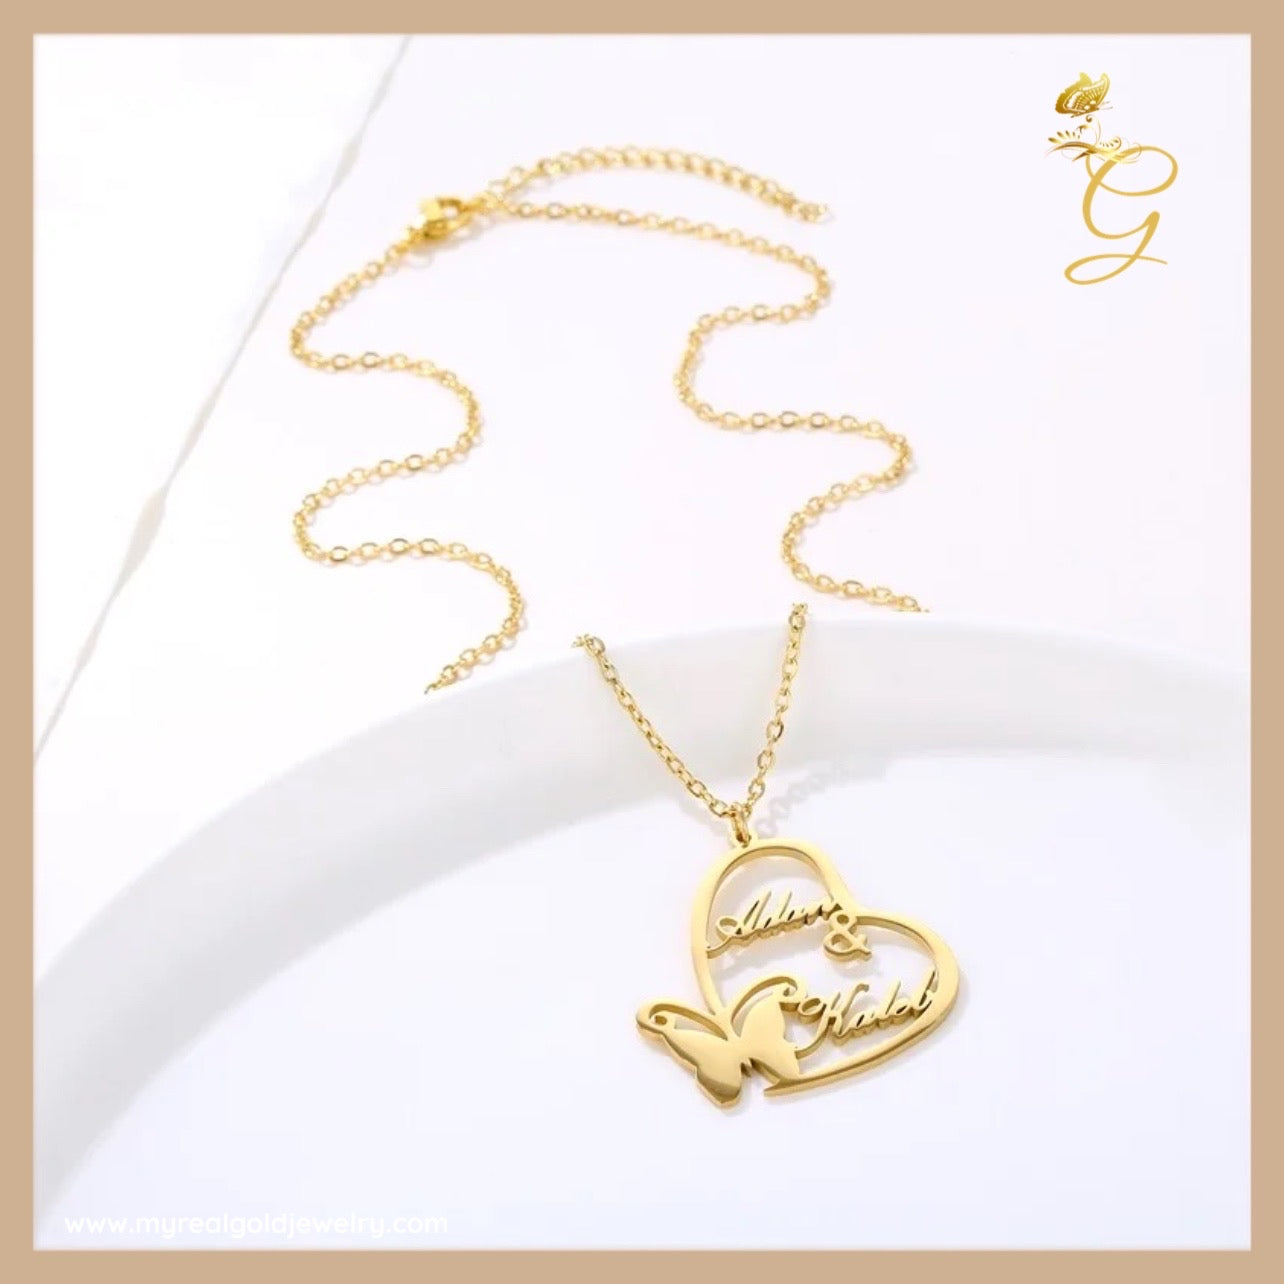 Heart Shaped Stainless Steel Photo Necklace Engraved Name Pendant